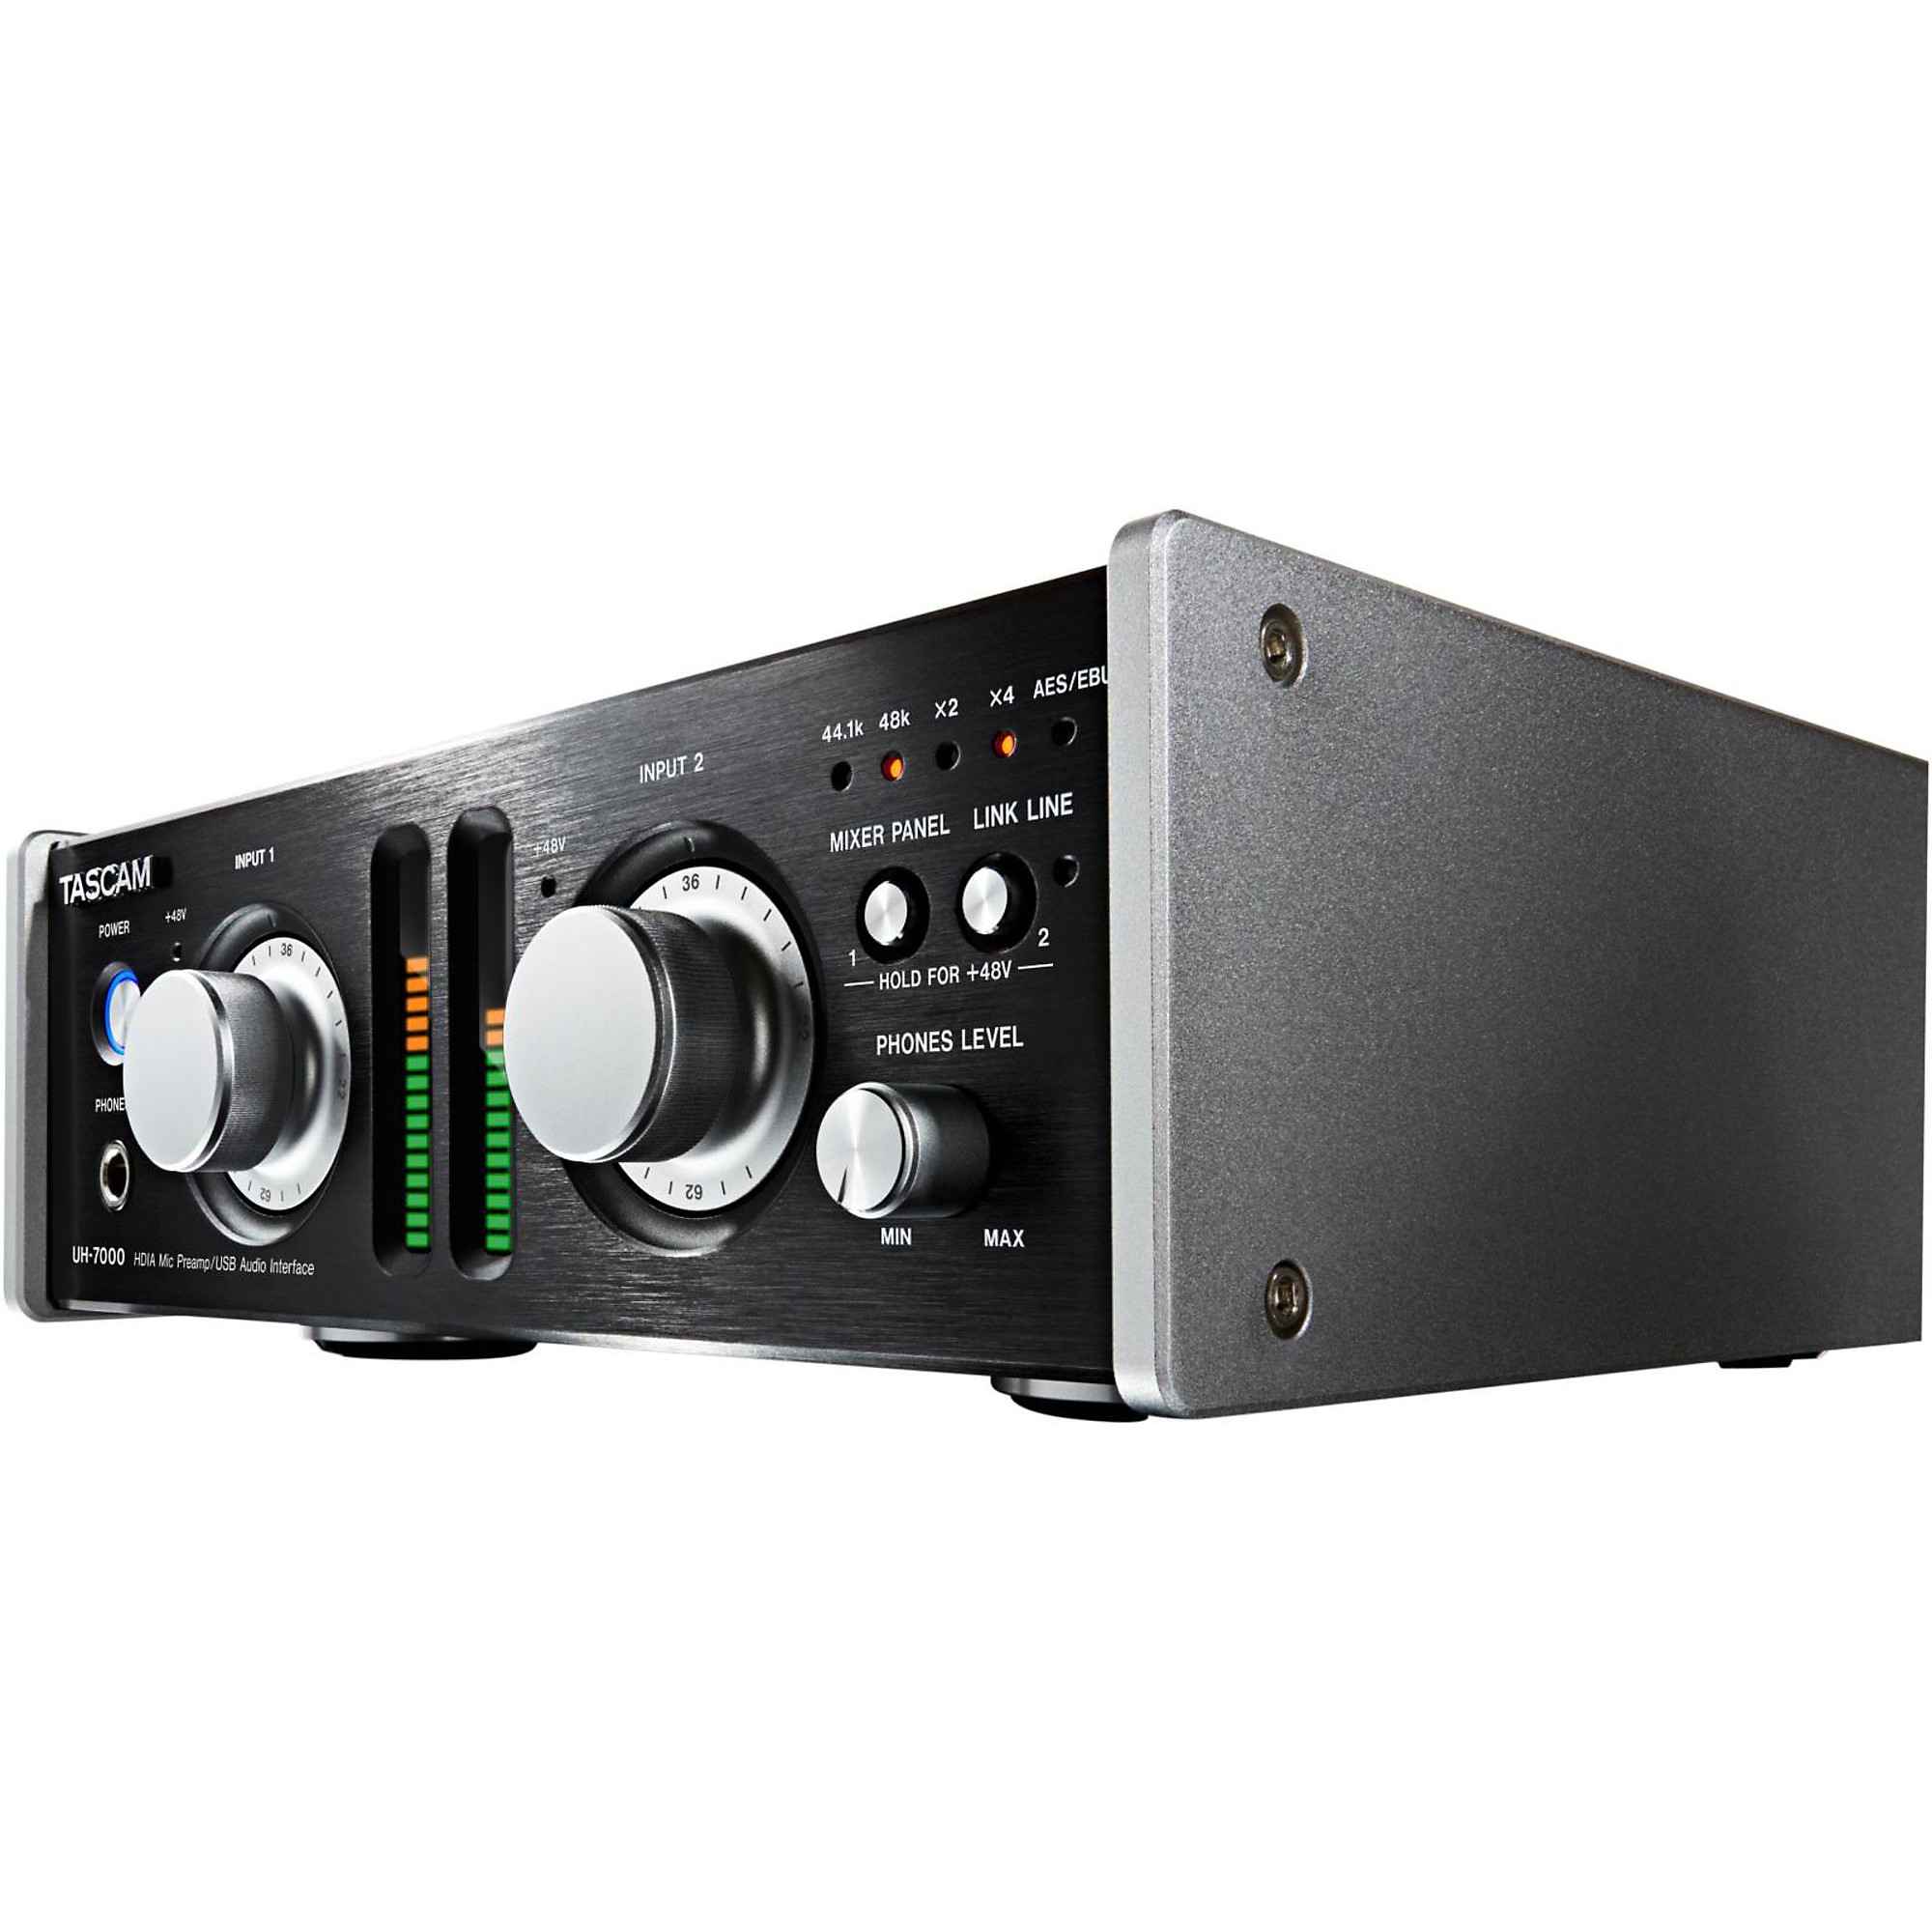 TASCAM UH-7000 High Resolution Interface and Stand Alone